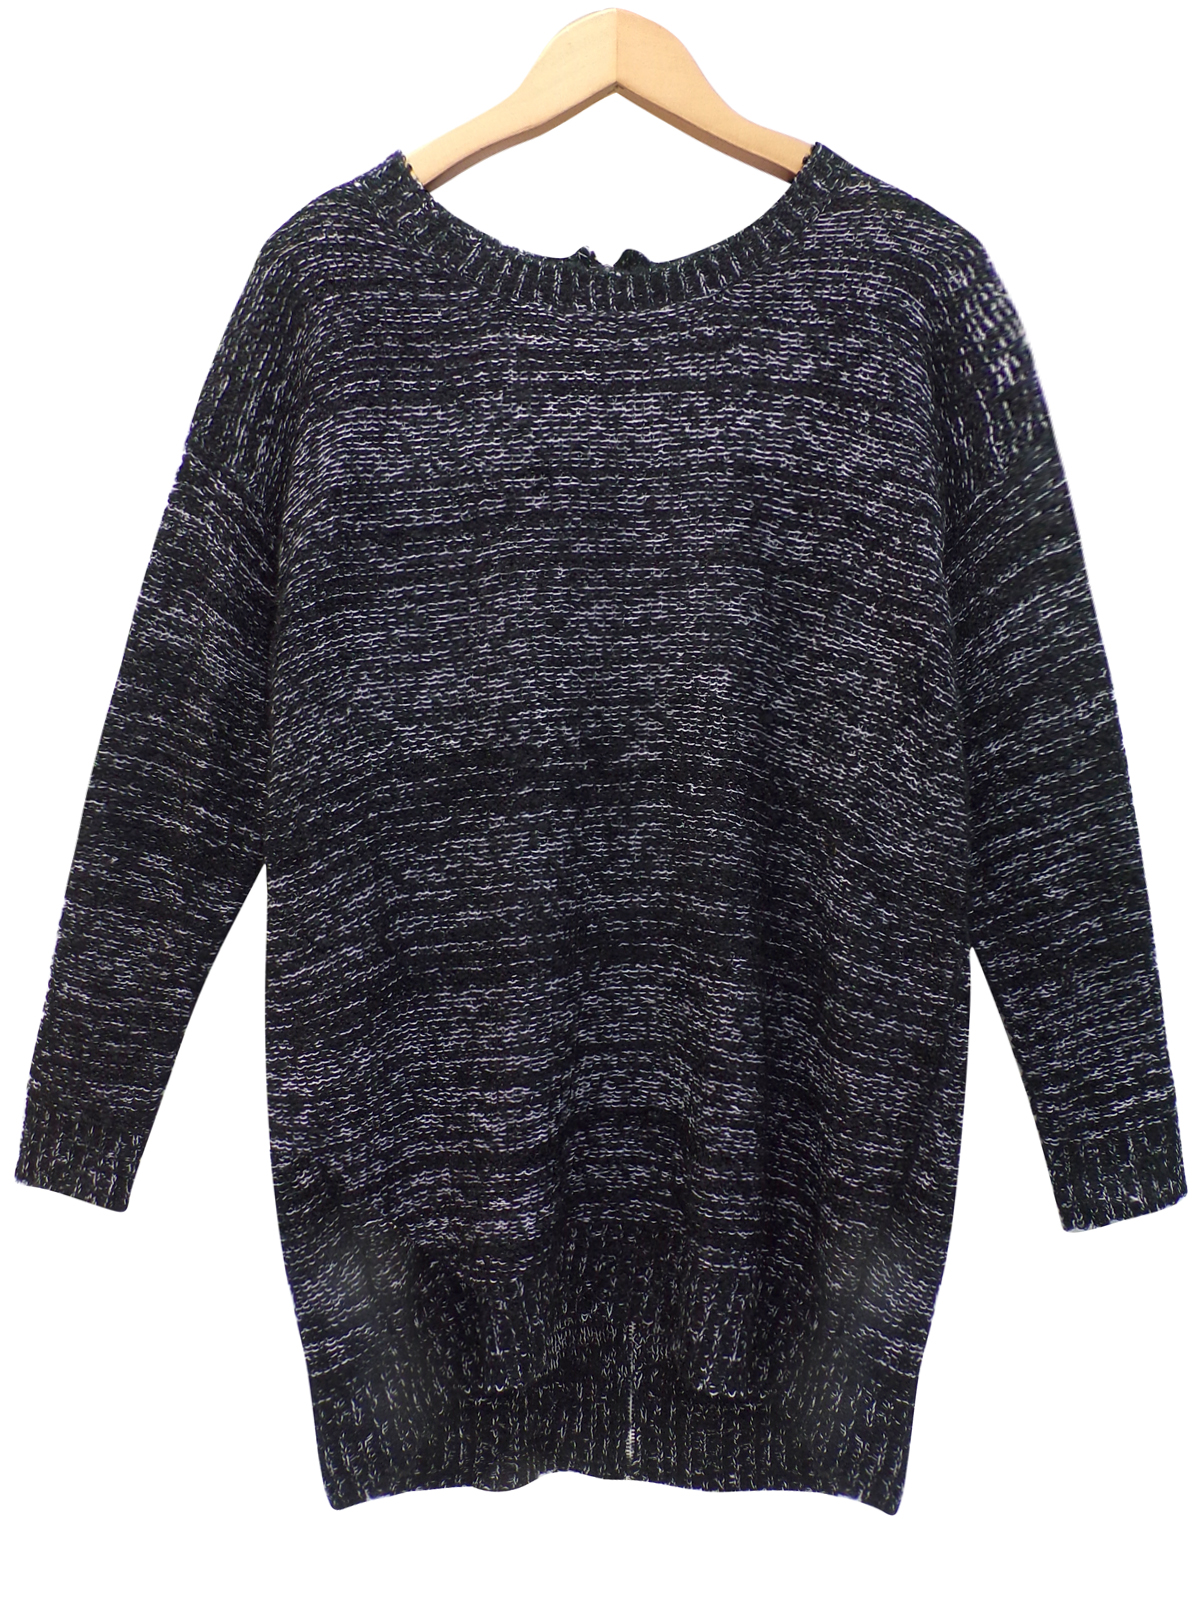 LIMITED COLLECTION Black Chunky Knit Asymmetric Jumper 